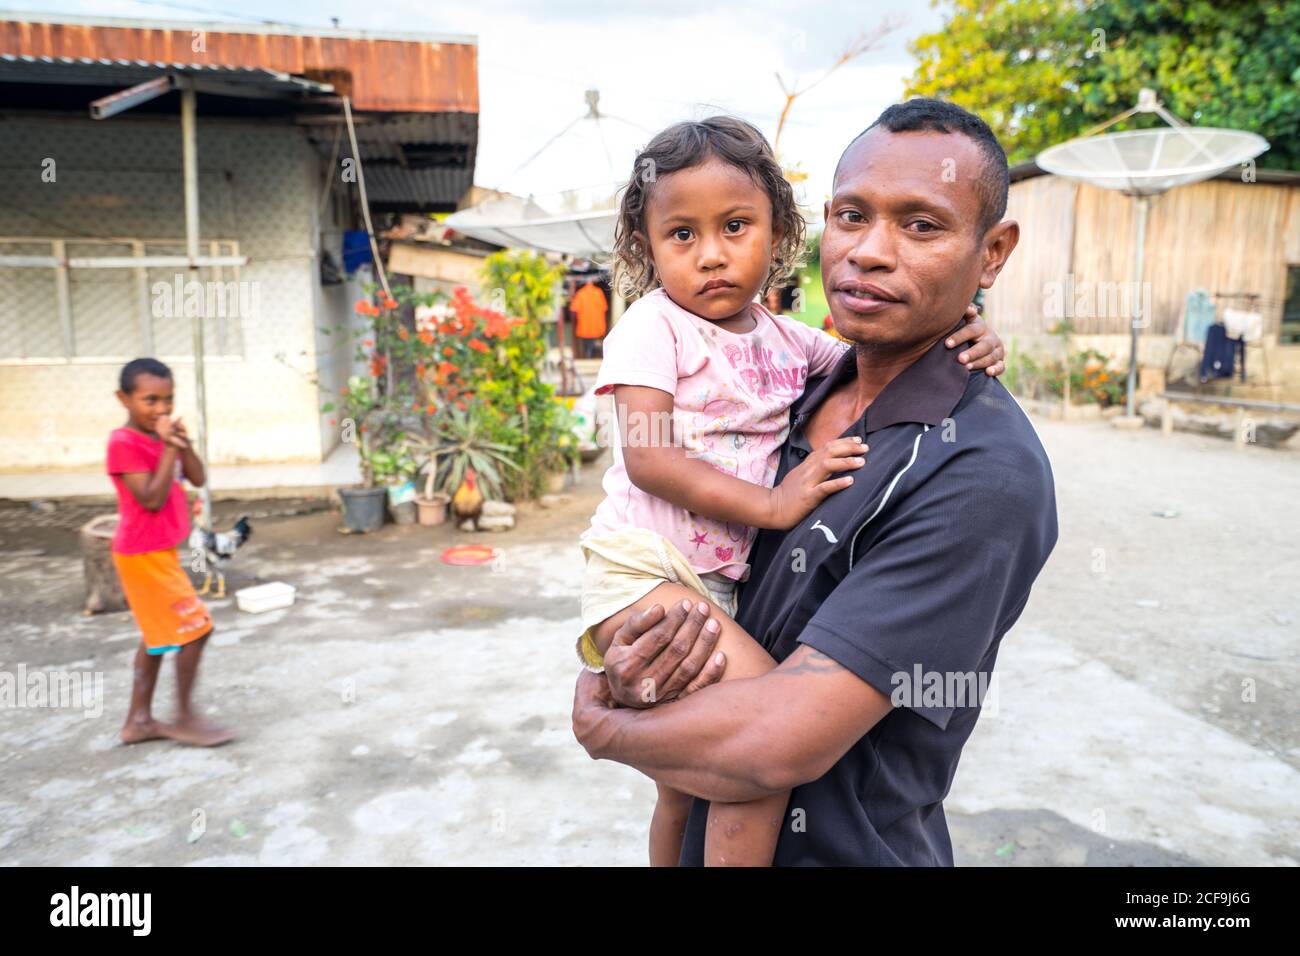 Dili, East Timor - AUGUST 08, 2018: Poor young Asian father holding little girl and looking at camera while standing on street next to house with boy in background Stock Photo